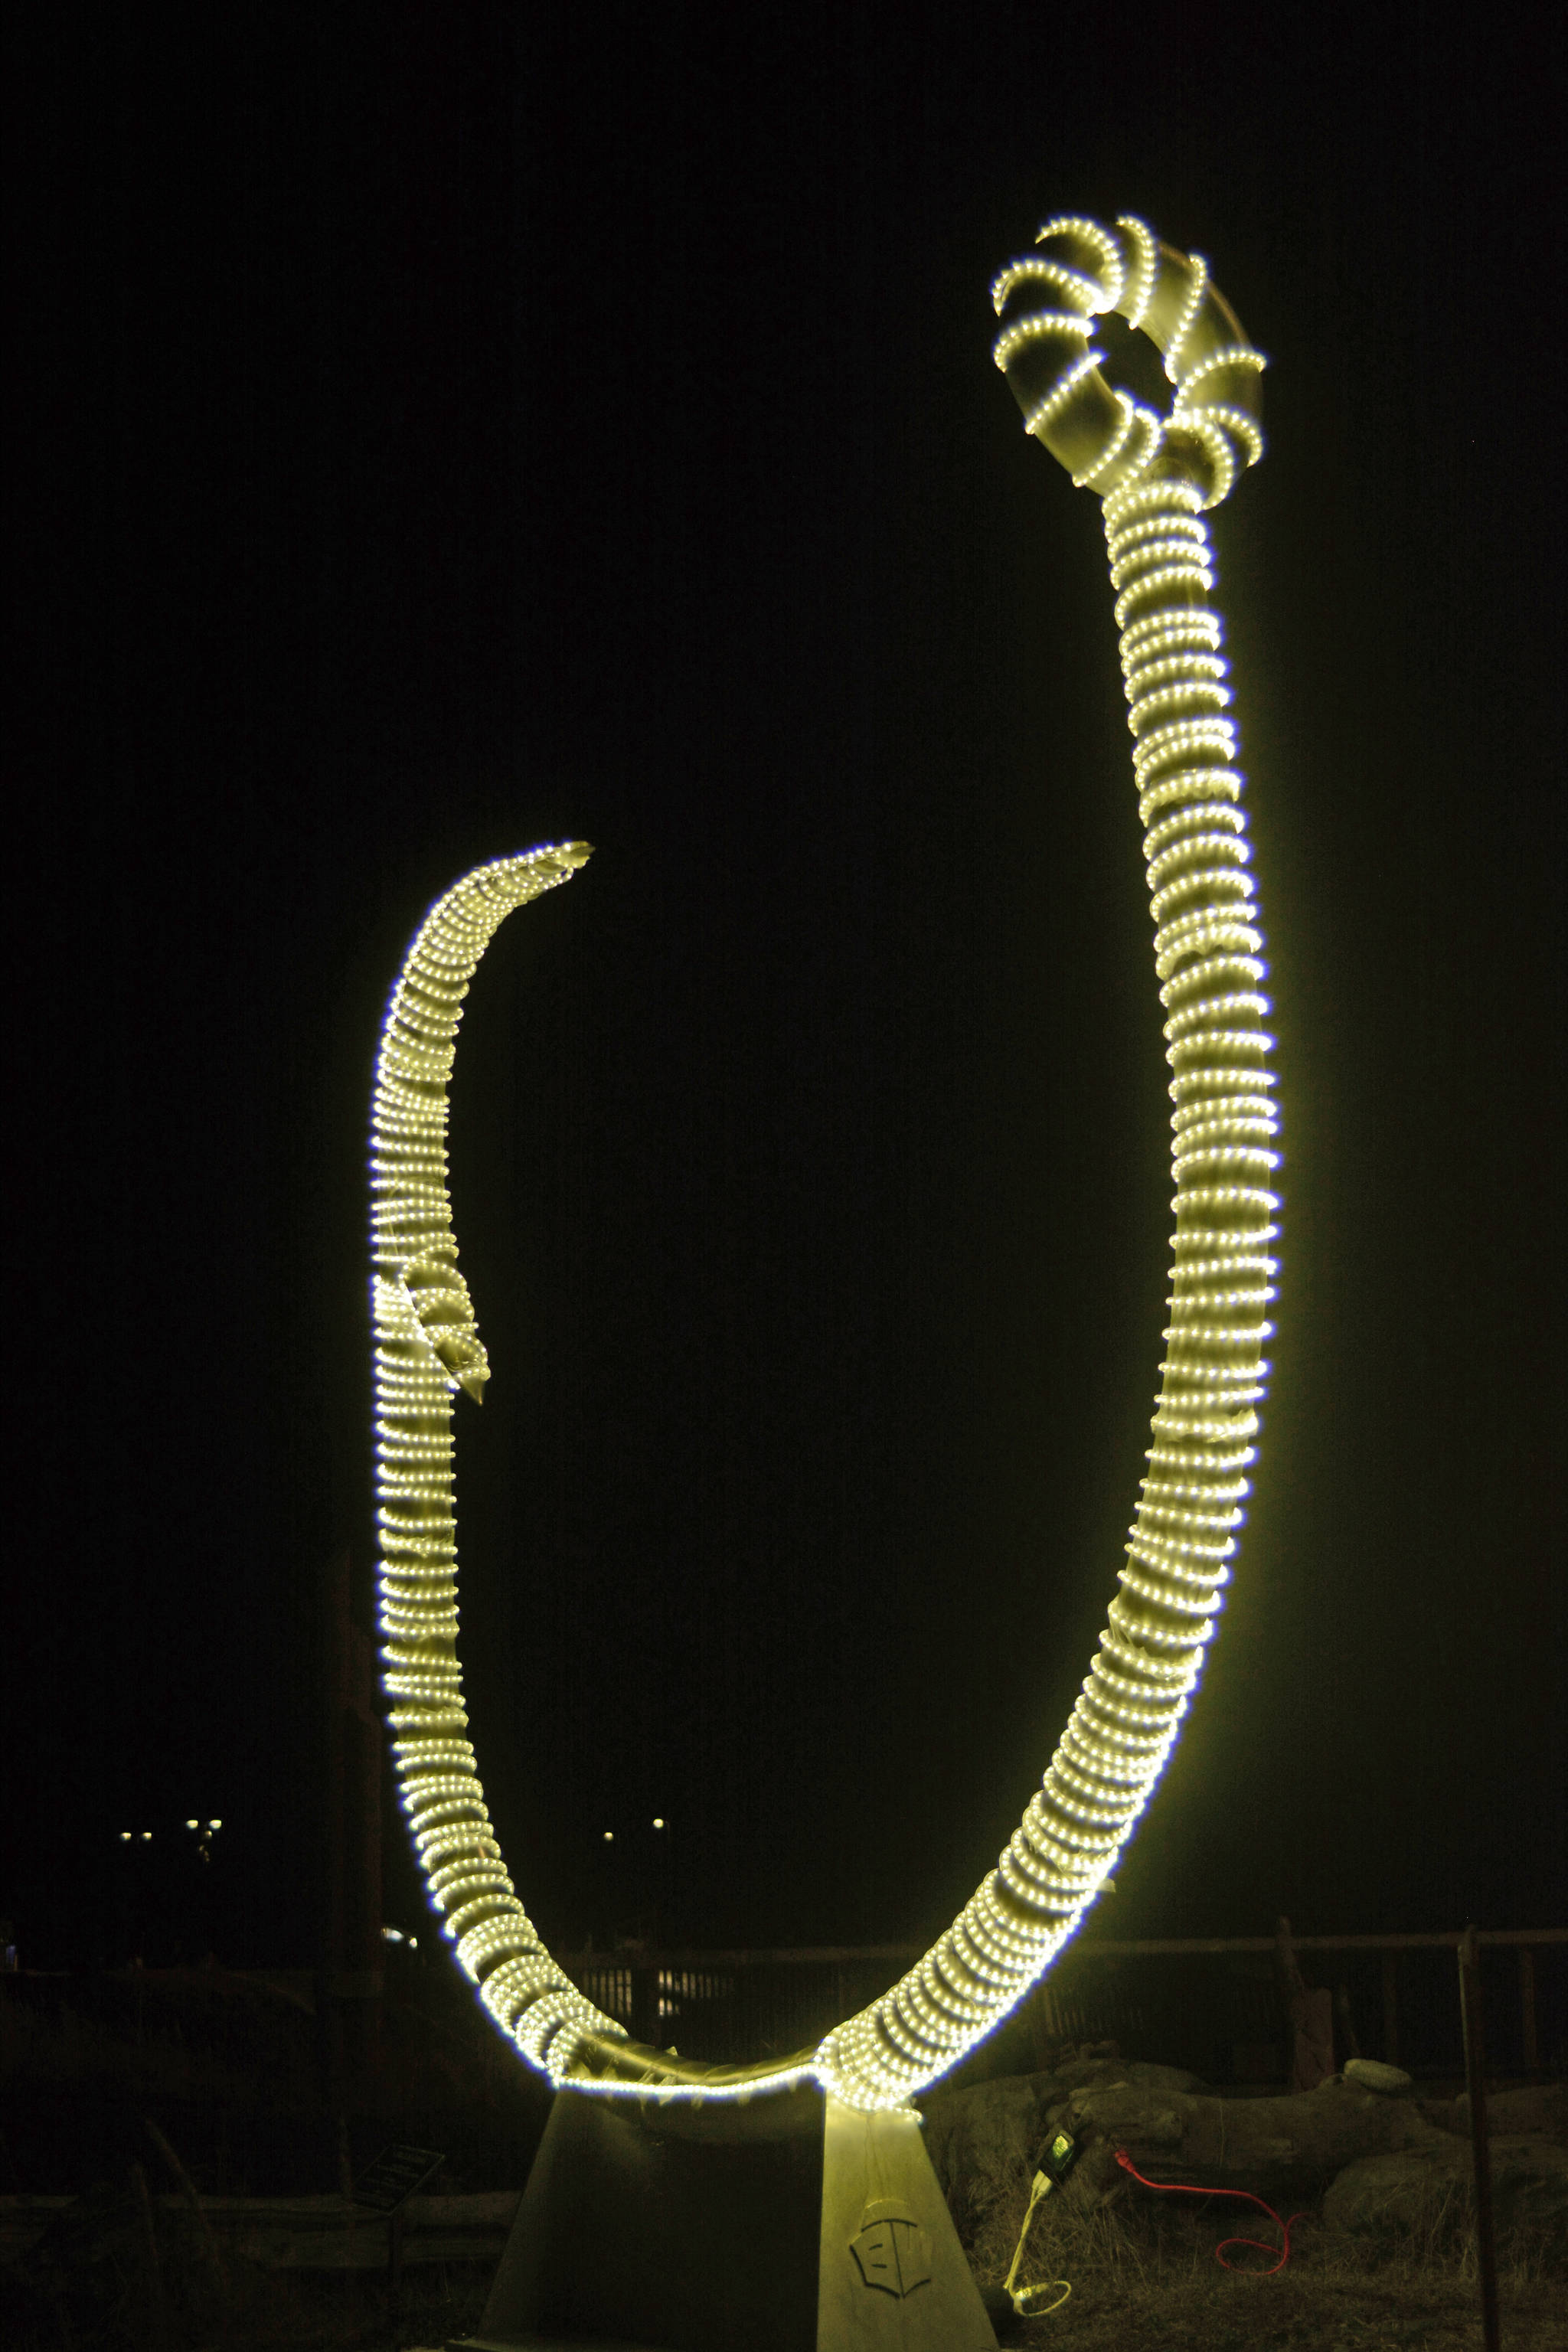 The halibut hook at the Homer Harbor has been wrapped in lights for the dark winter on Nov. 17, 2018, in Homer, Alaska. (Photo by Michael Armstrong/Homer News)